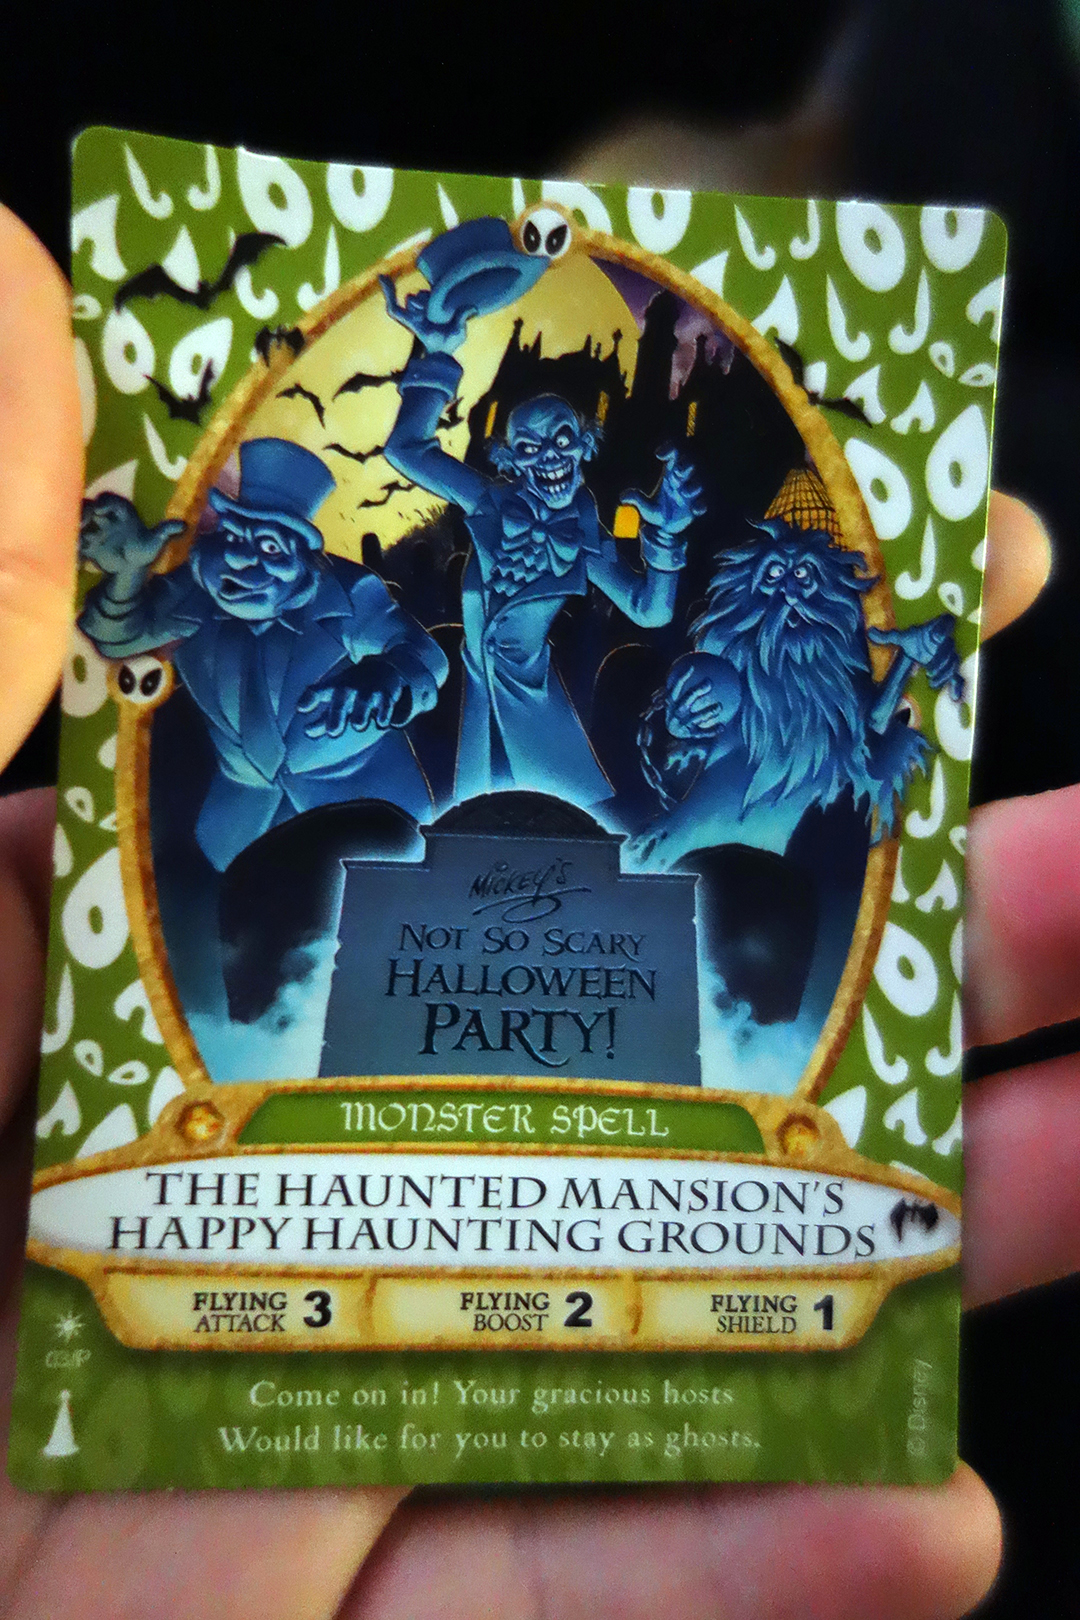 This is the Limited Edition Sorcerers of the Magic Kingdom card.  The thing is fetching like $50 on Ebay.  Hmmm pirate, ebay, free mnsshp visit...  Give me two $20's or dinner at a nice restaurant and it's yours :)